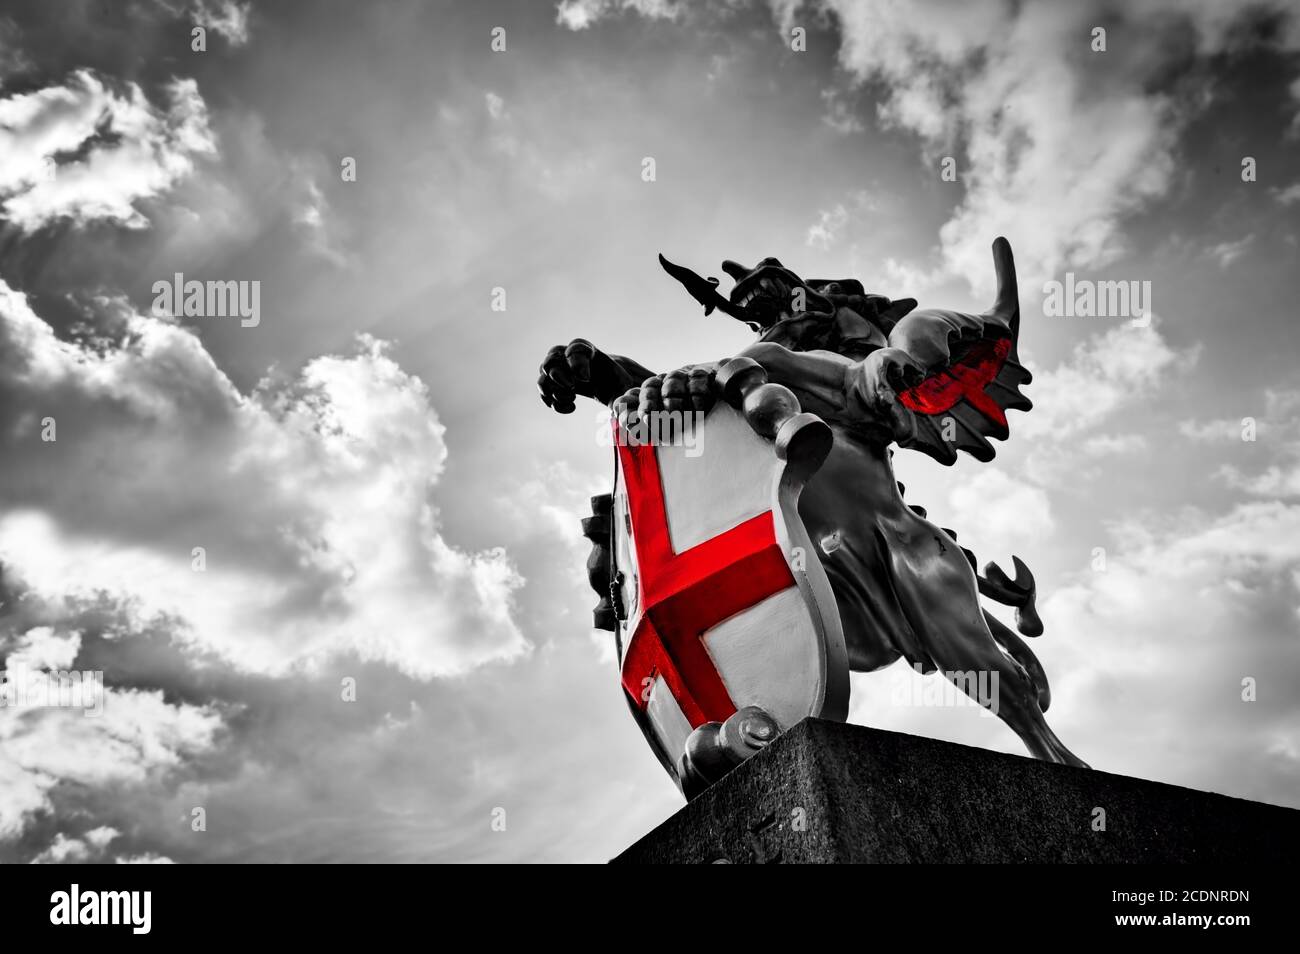 St George dragon statue in London, the UK. Black and white, red flag, shield. Stock Photo